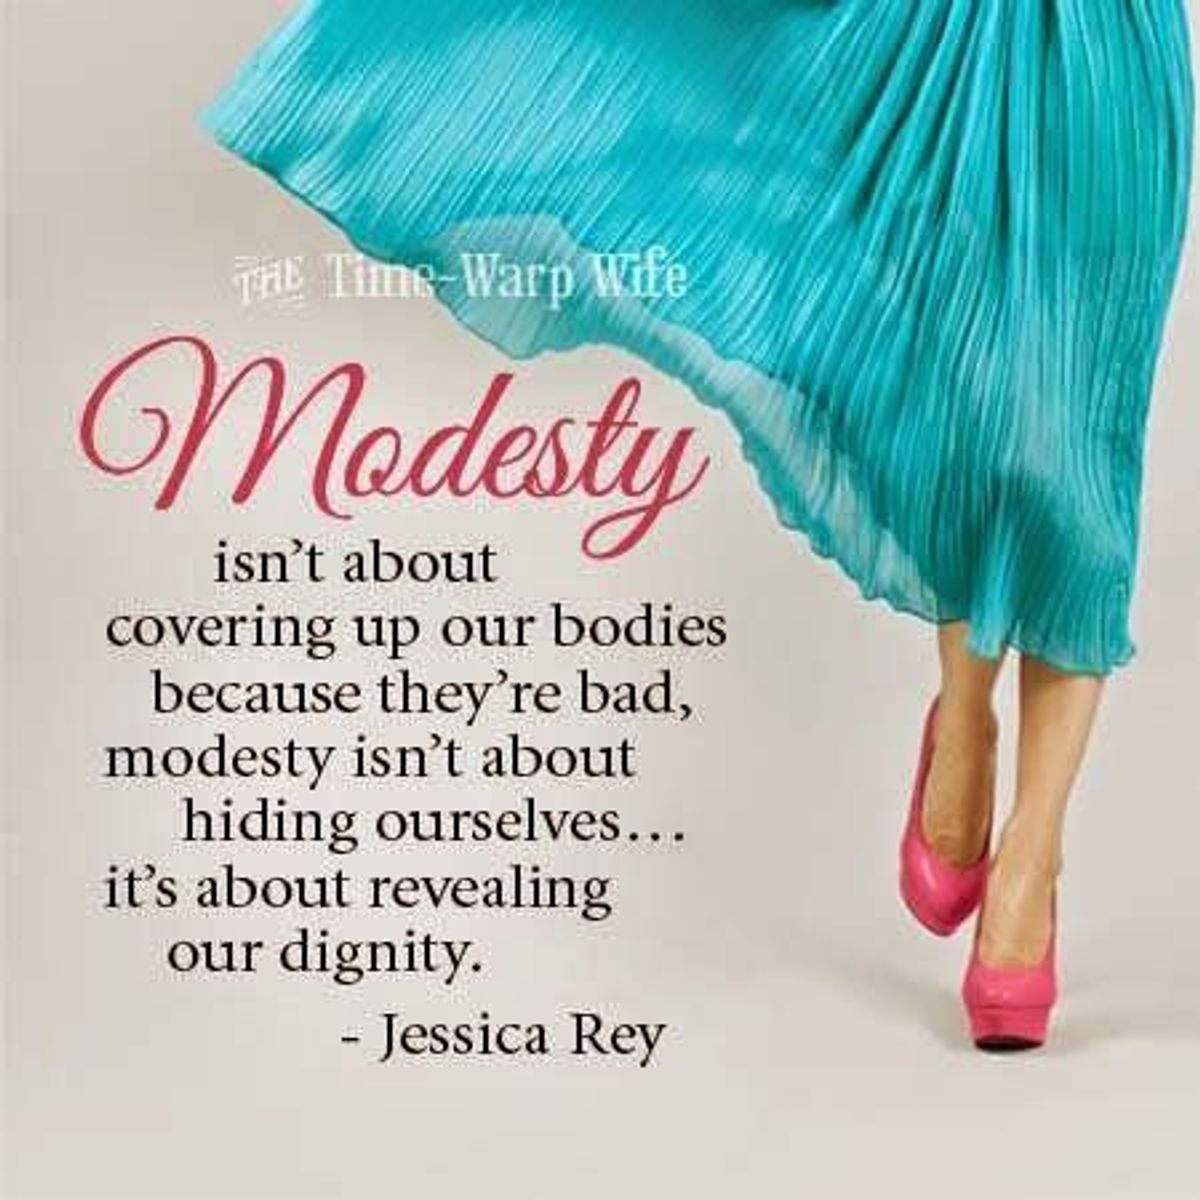 My Modesty Does Not Mean I'm Oppressed